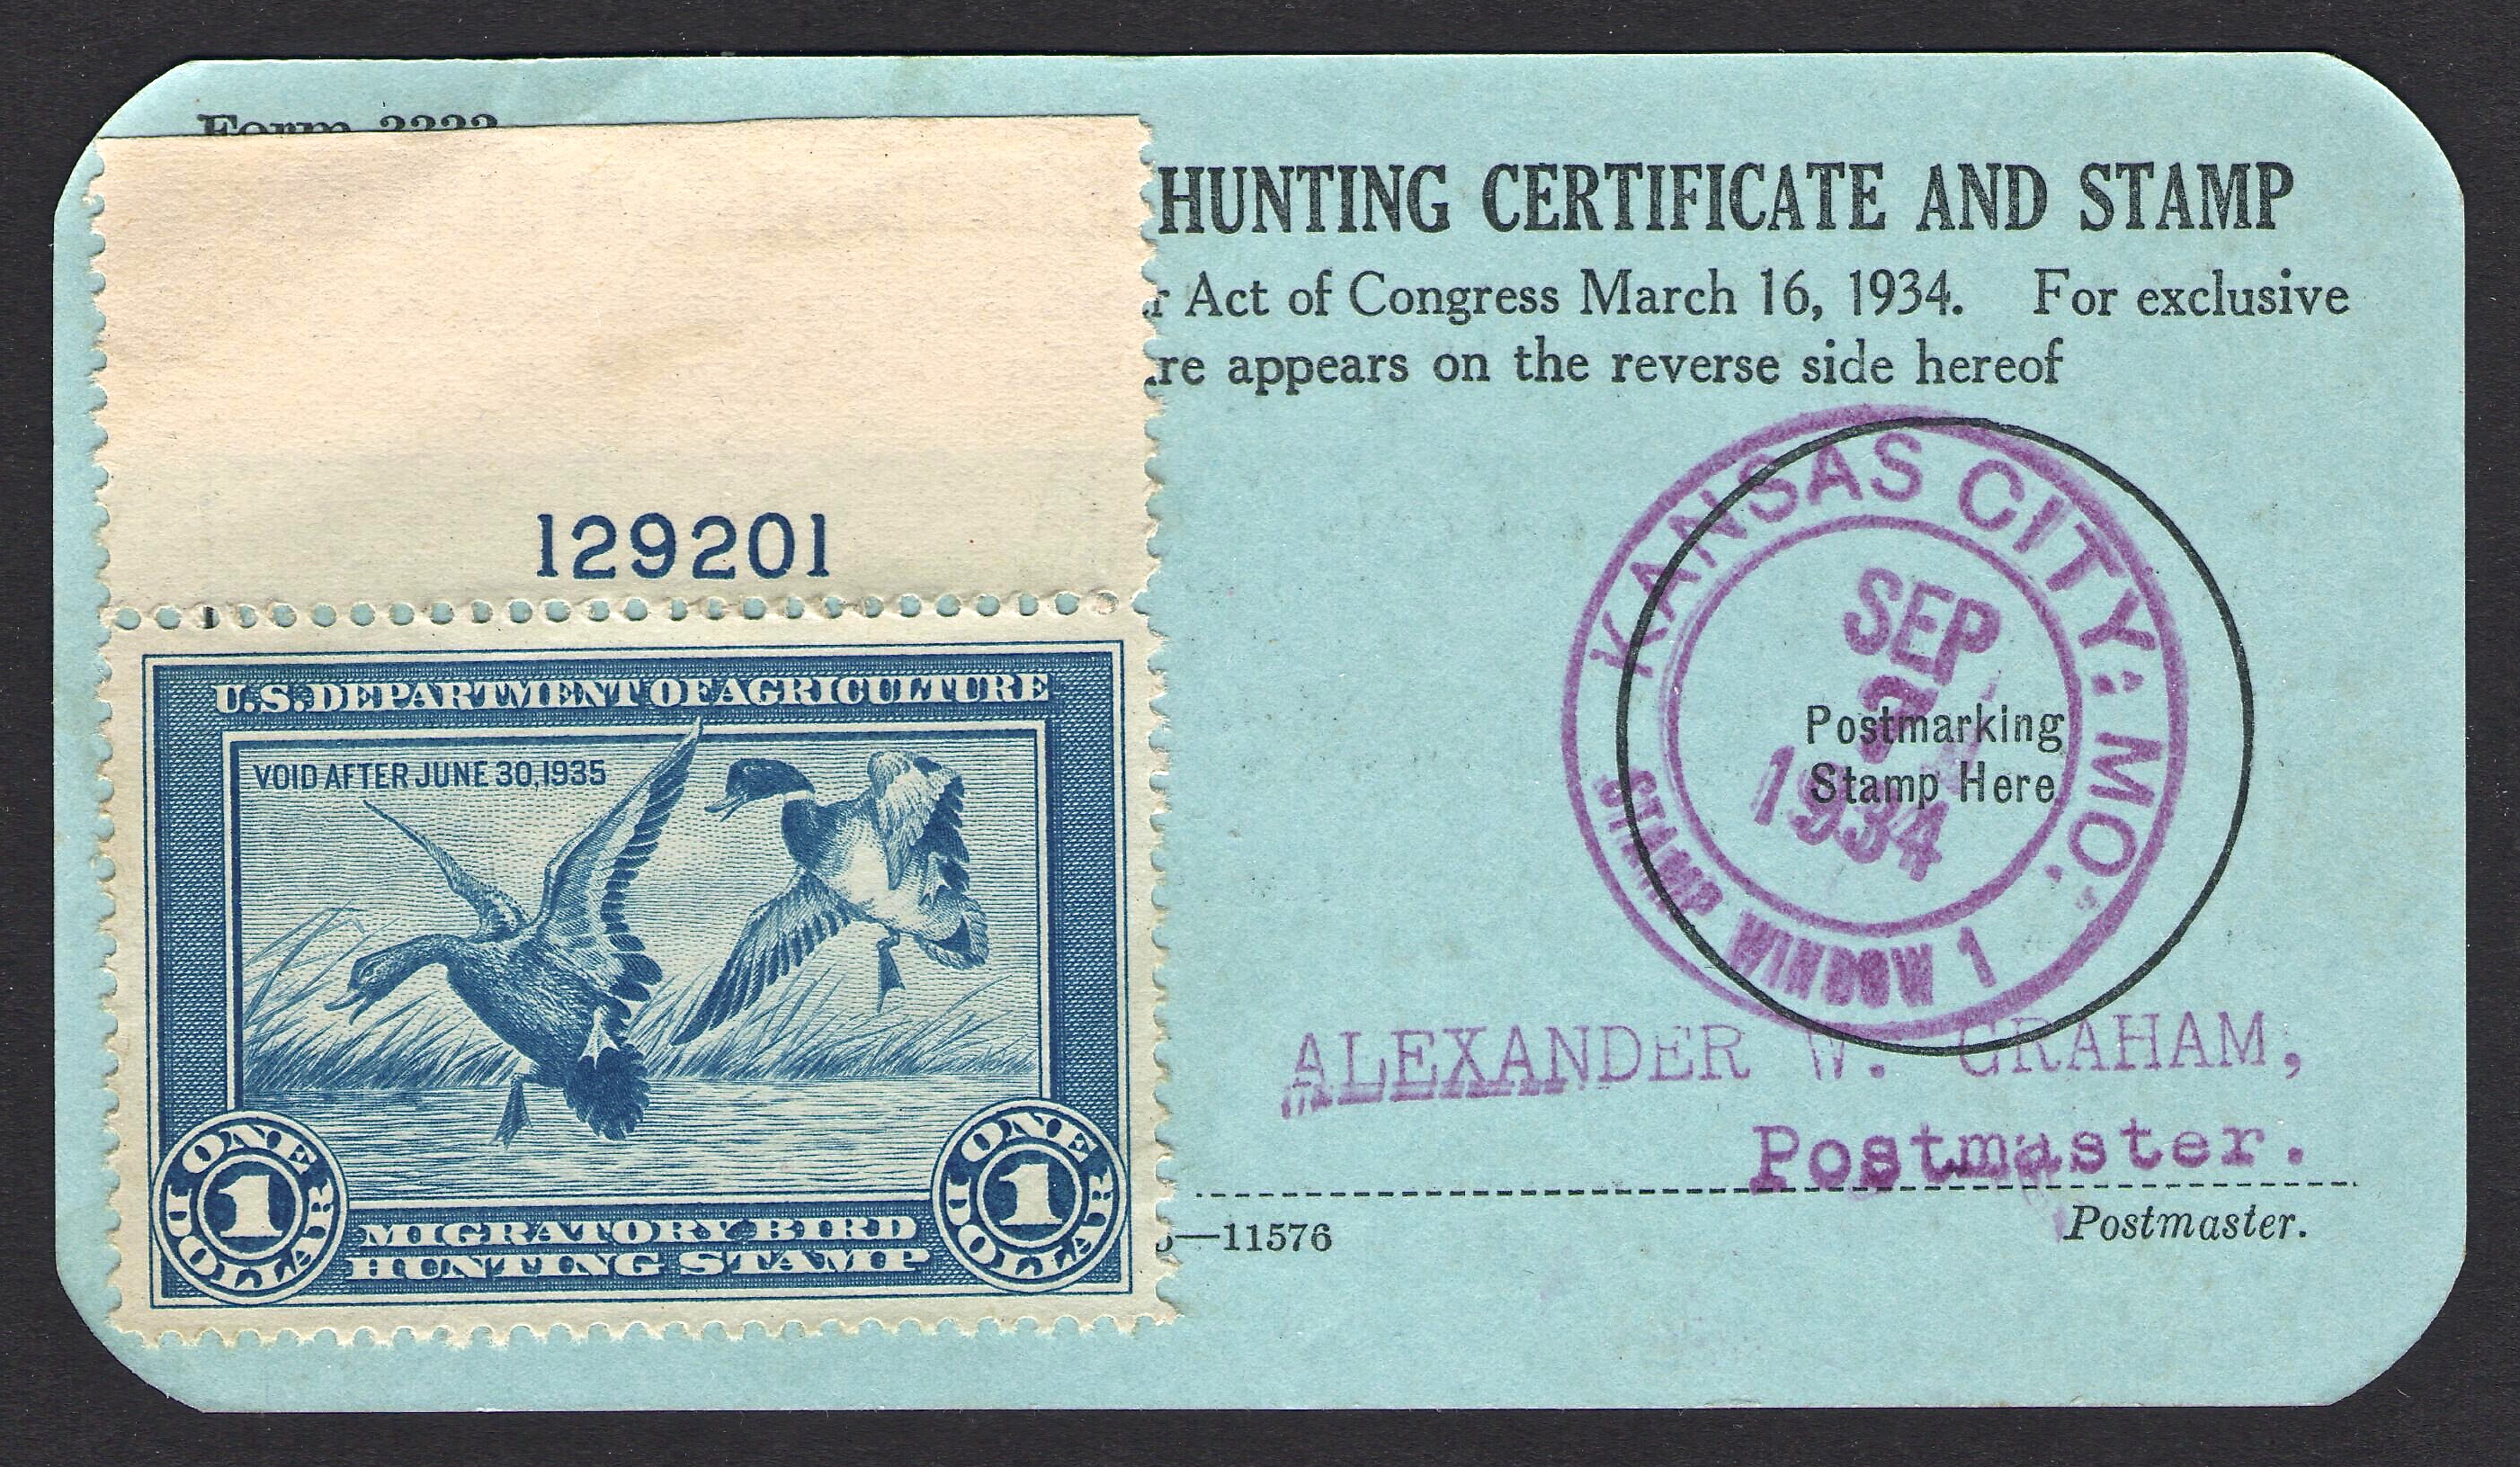 RW1 on Form 3333 Cancelled Stamp Window